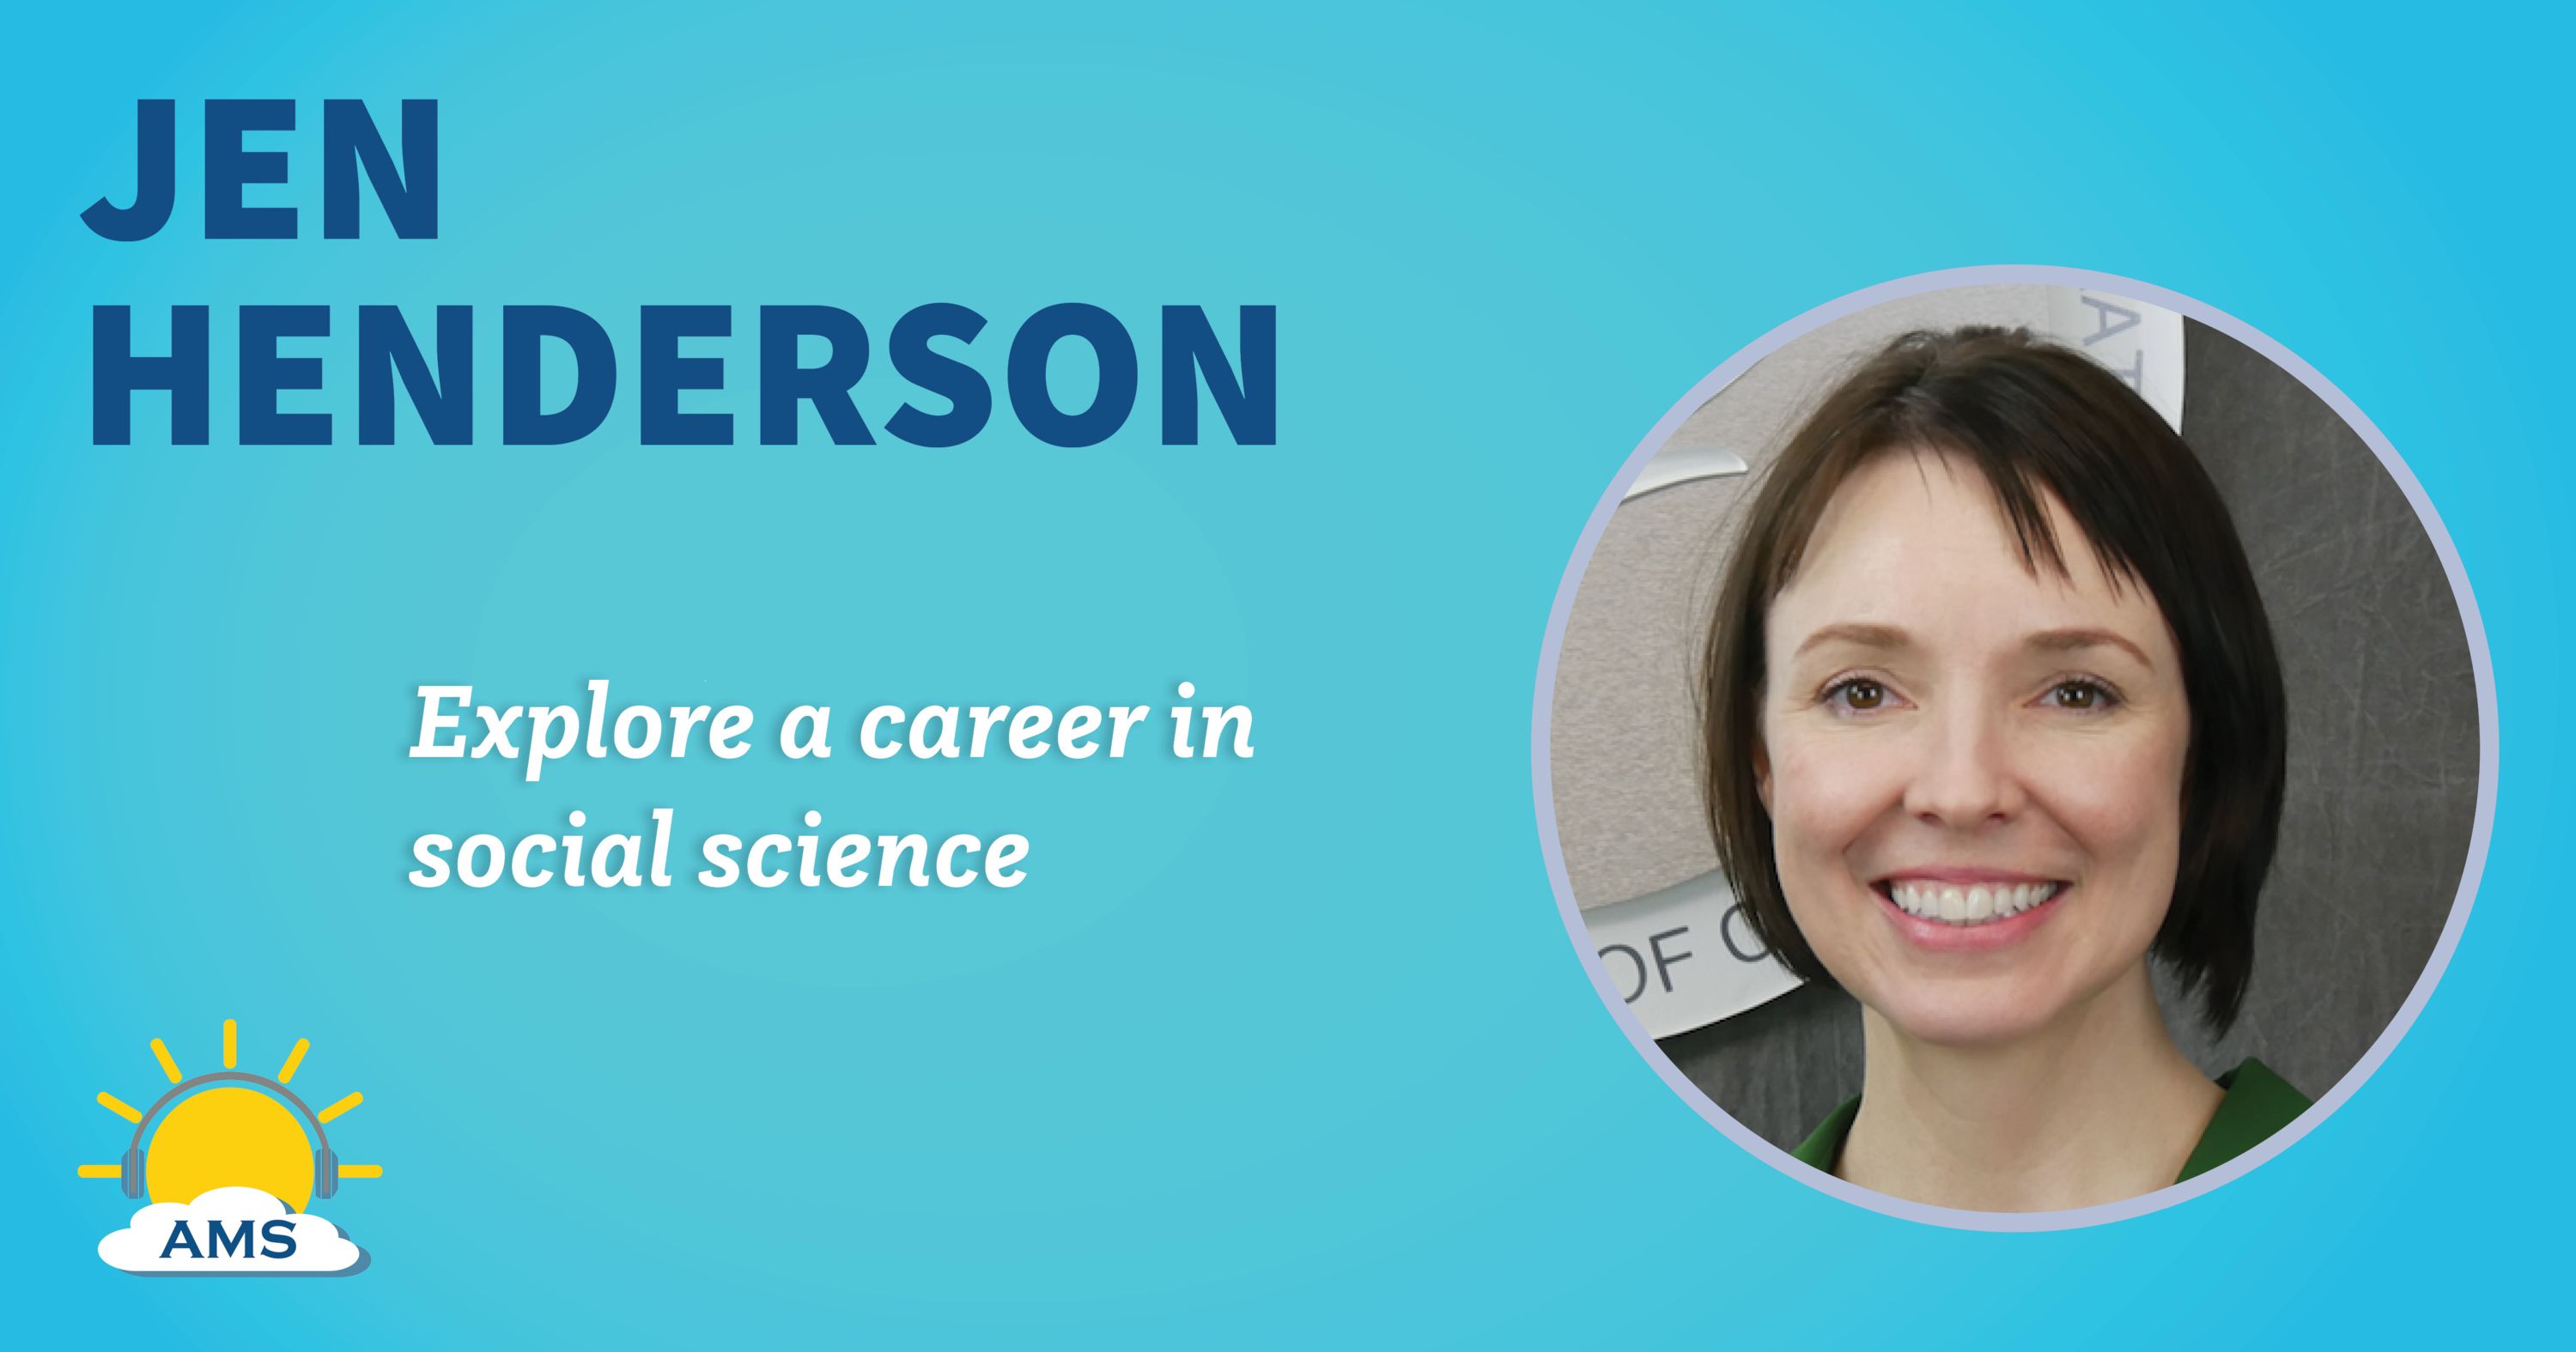 jen henderson headshot graphic with teaser text that reads &quotexplore a career in social science"